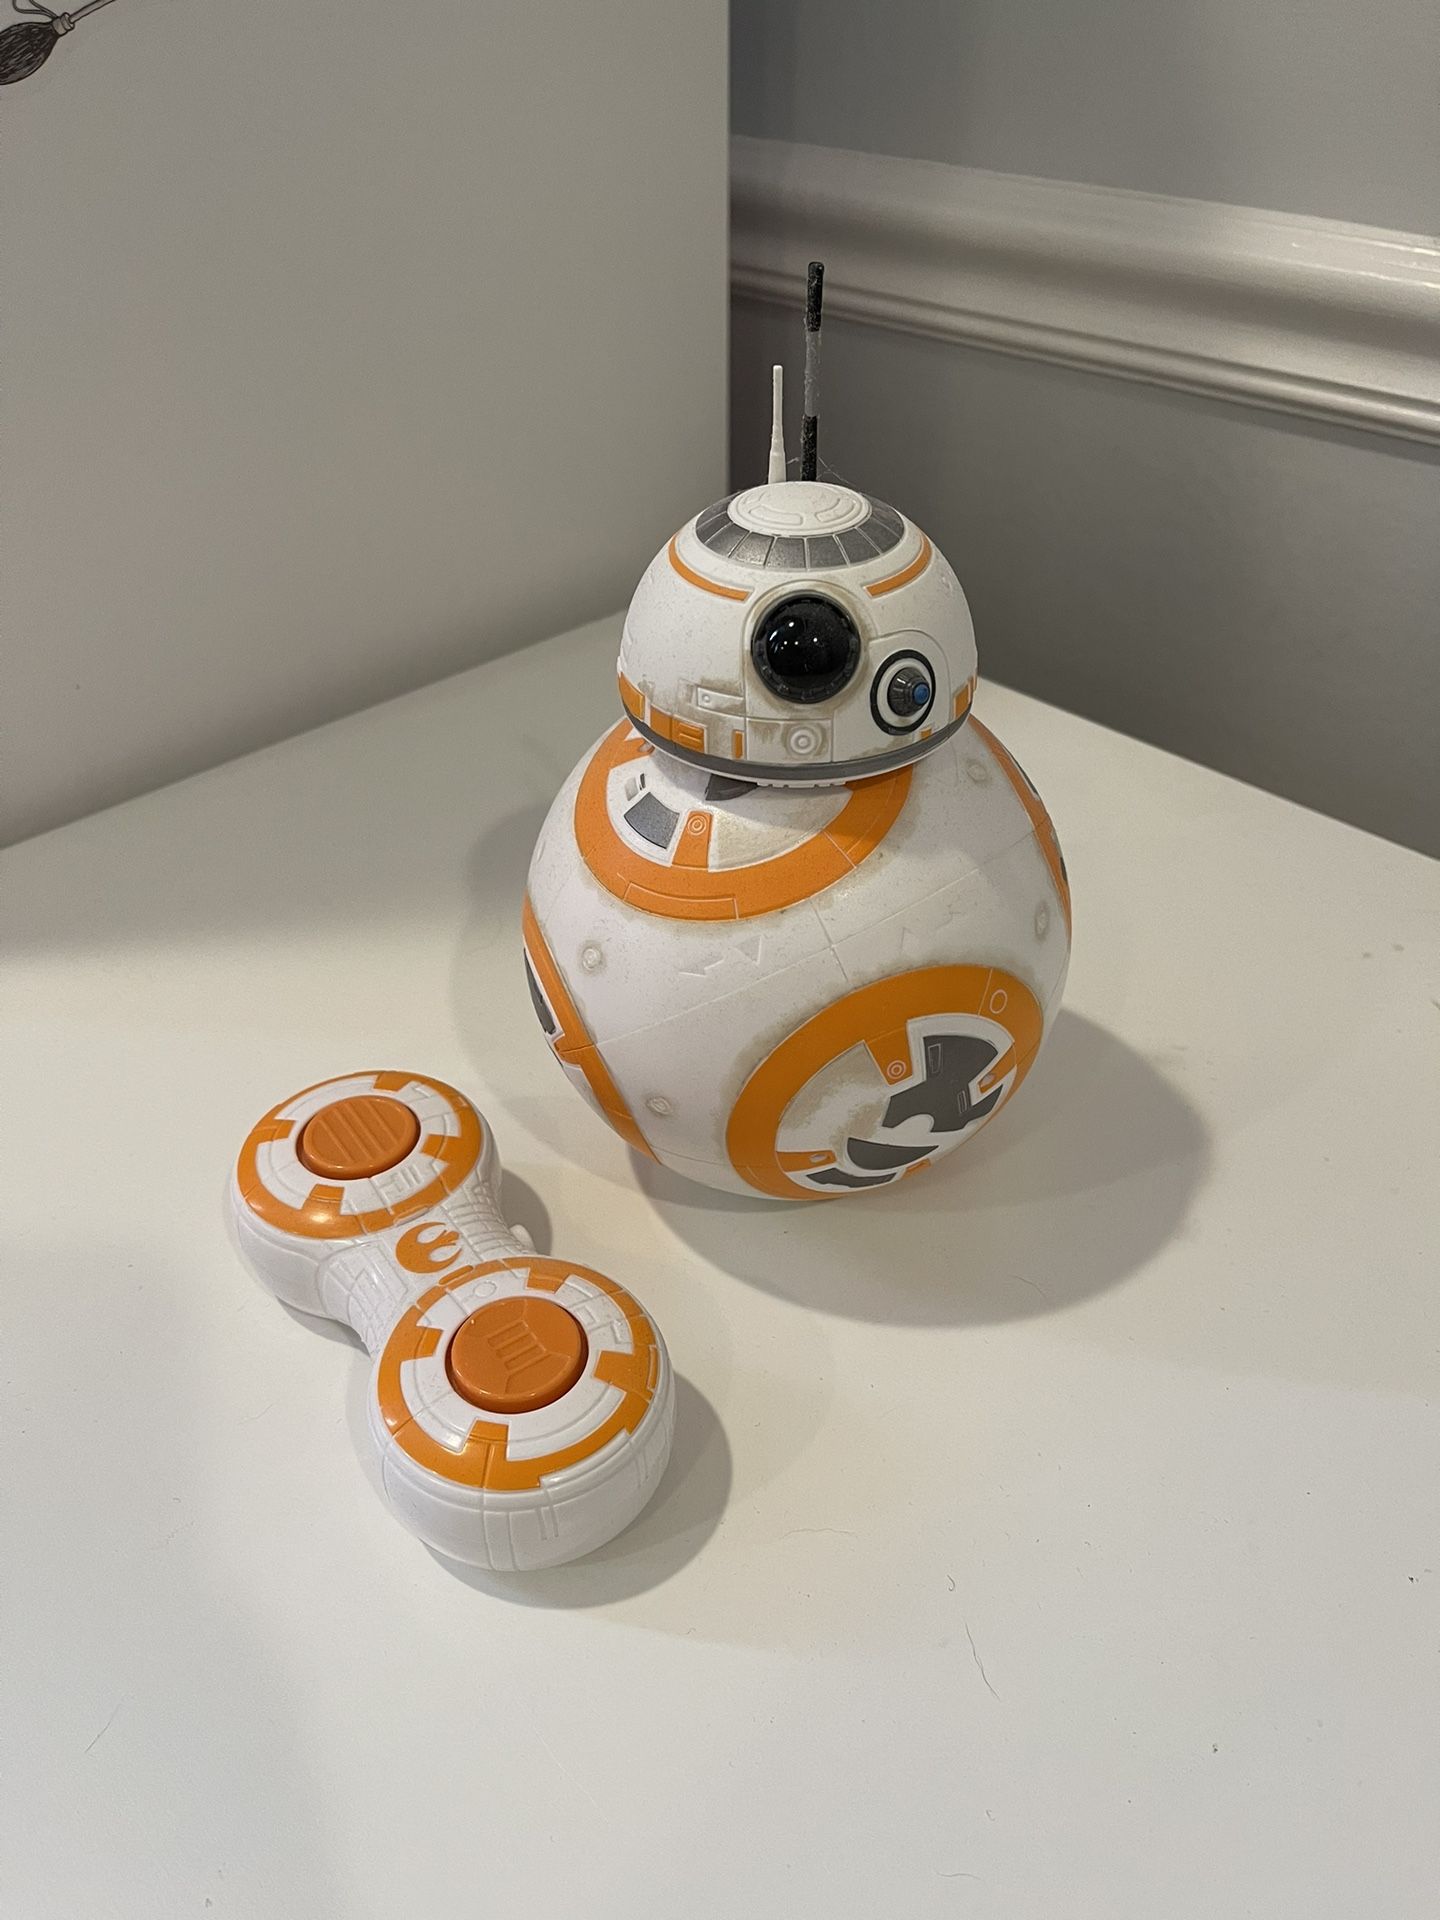 Star Wars RC remote Controlled BB8